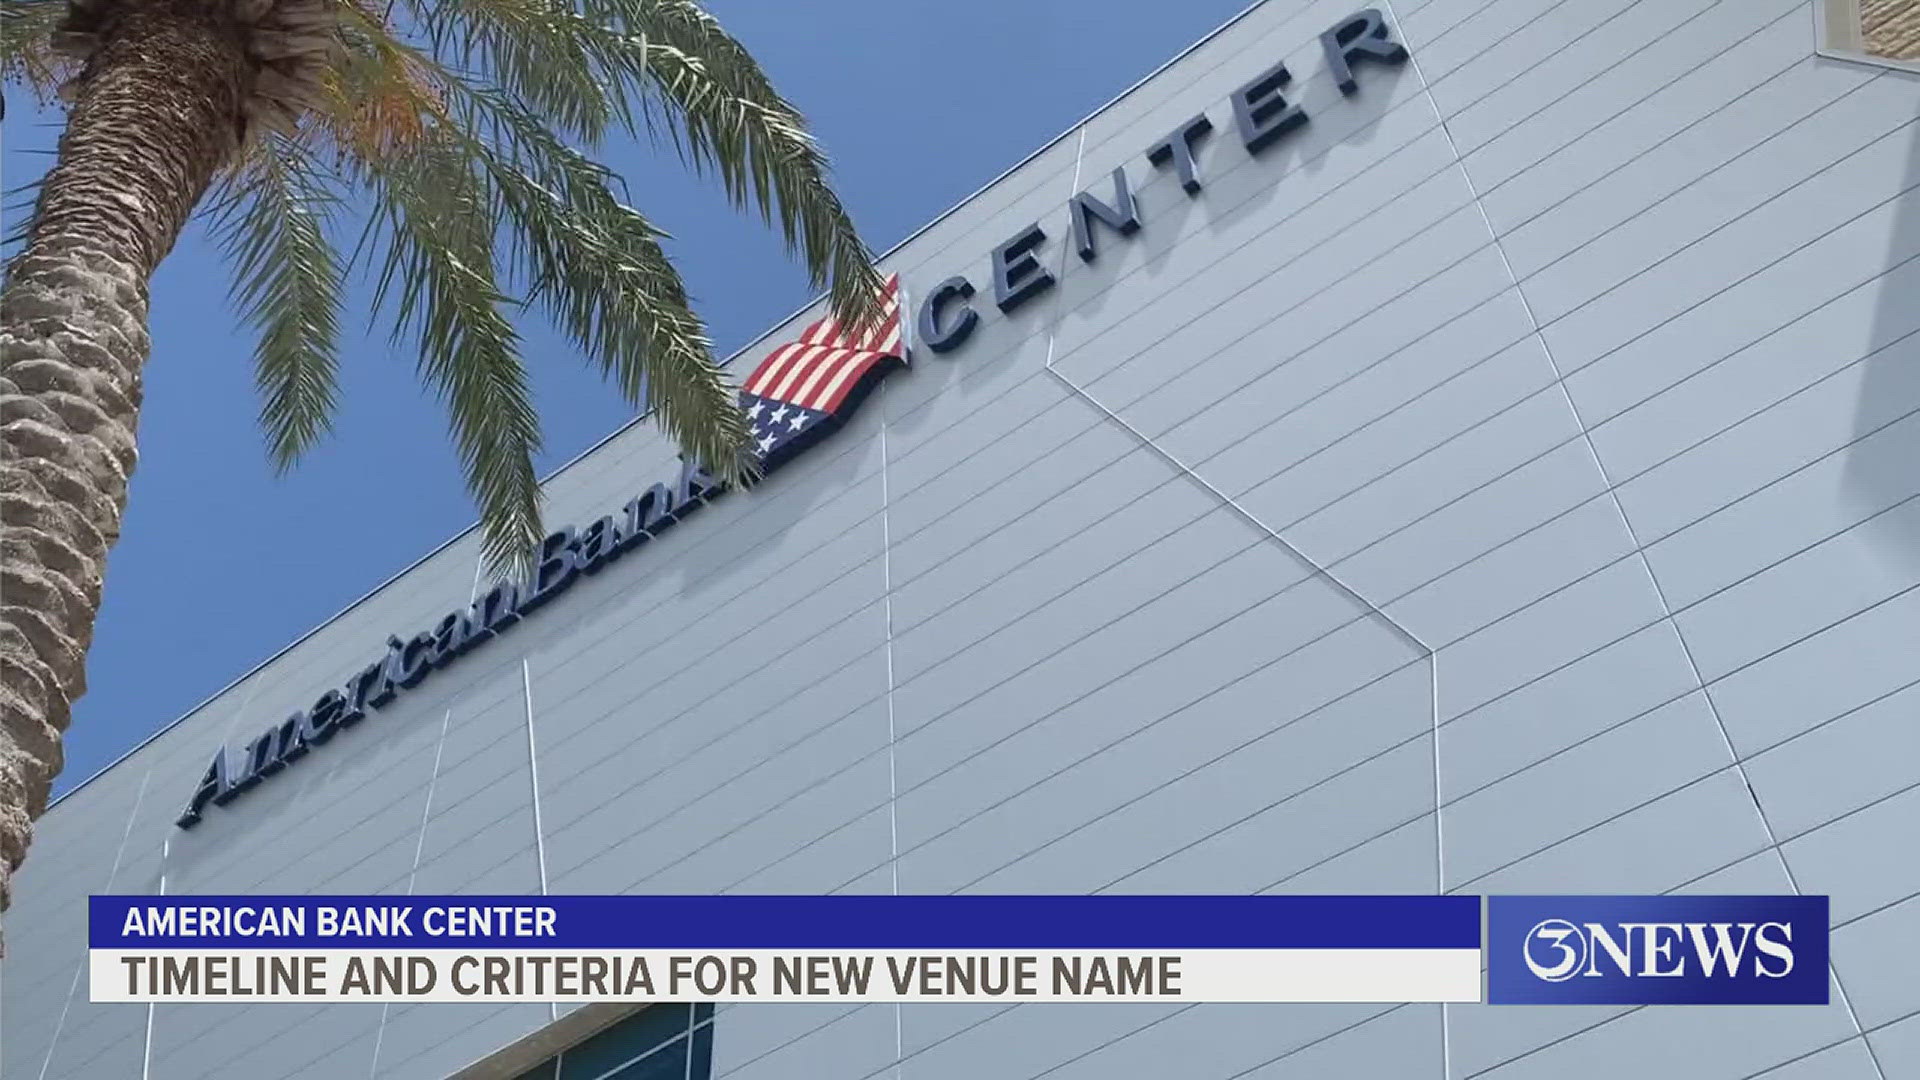 The company that manages the American Bank Center, OVG 360, has about five months to pick a new name before the naming rights expire on September 30.